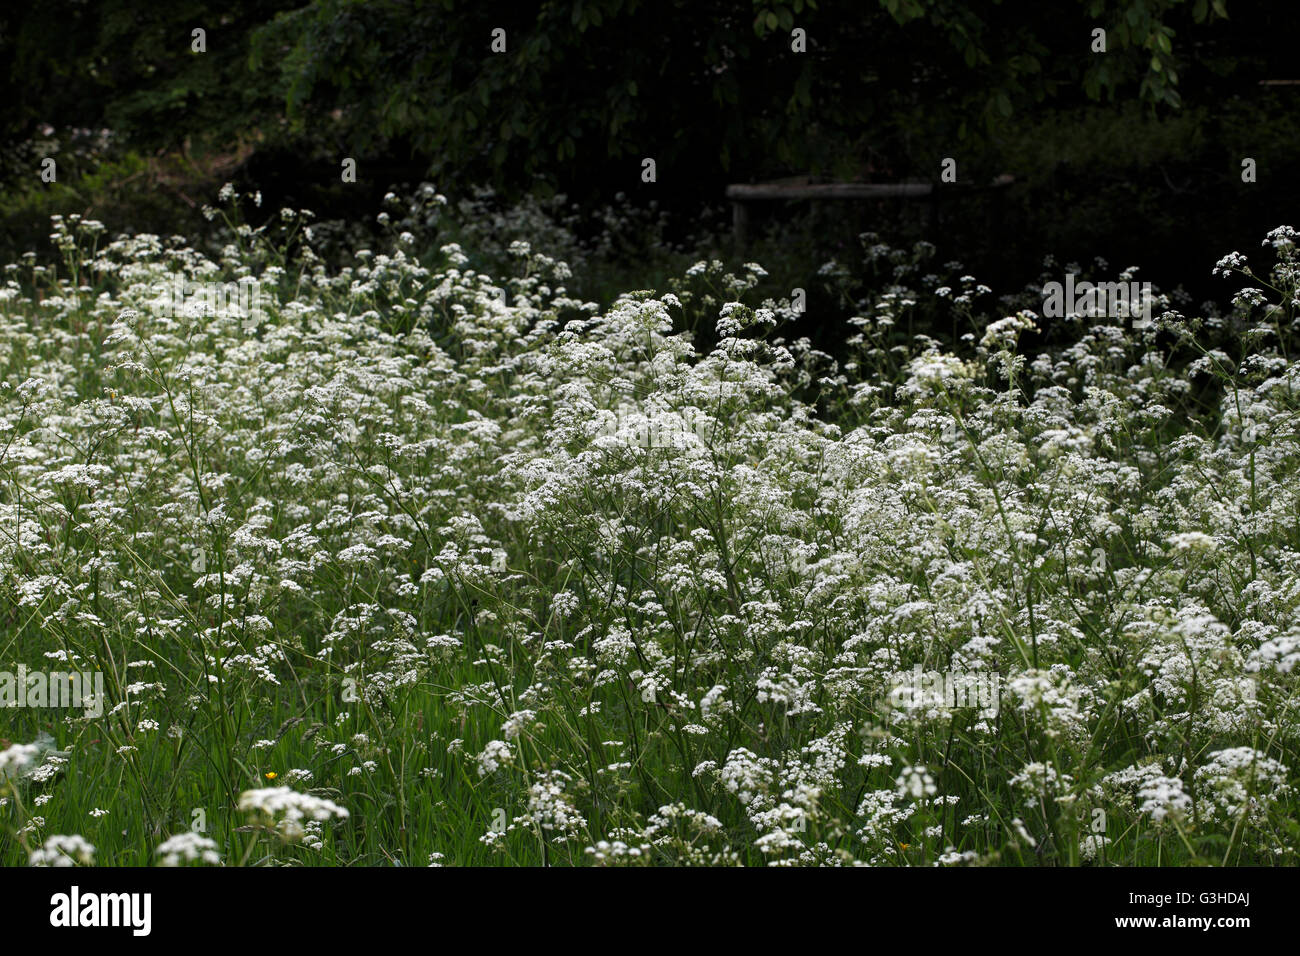 Anthriscus sylvestris, known as cow parsley wild chervil wild beaked parsley, keck or Queen Anne's lace Stock Photo